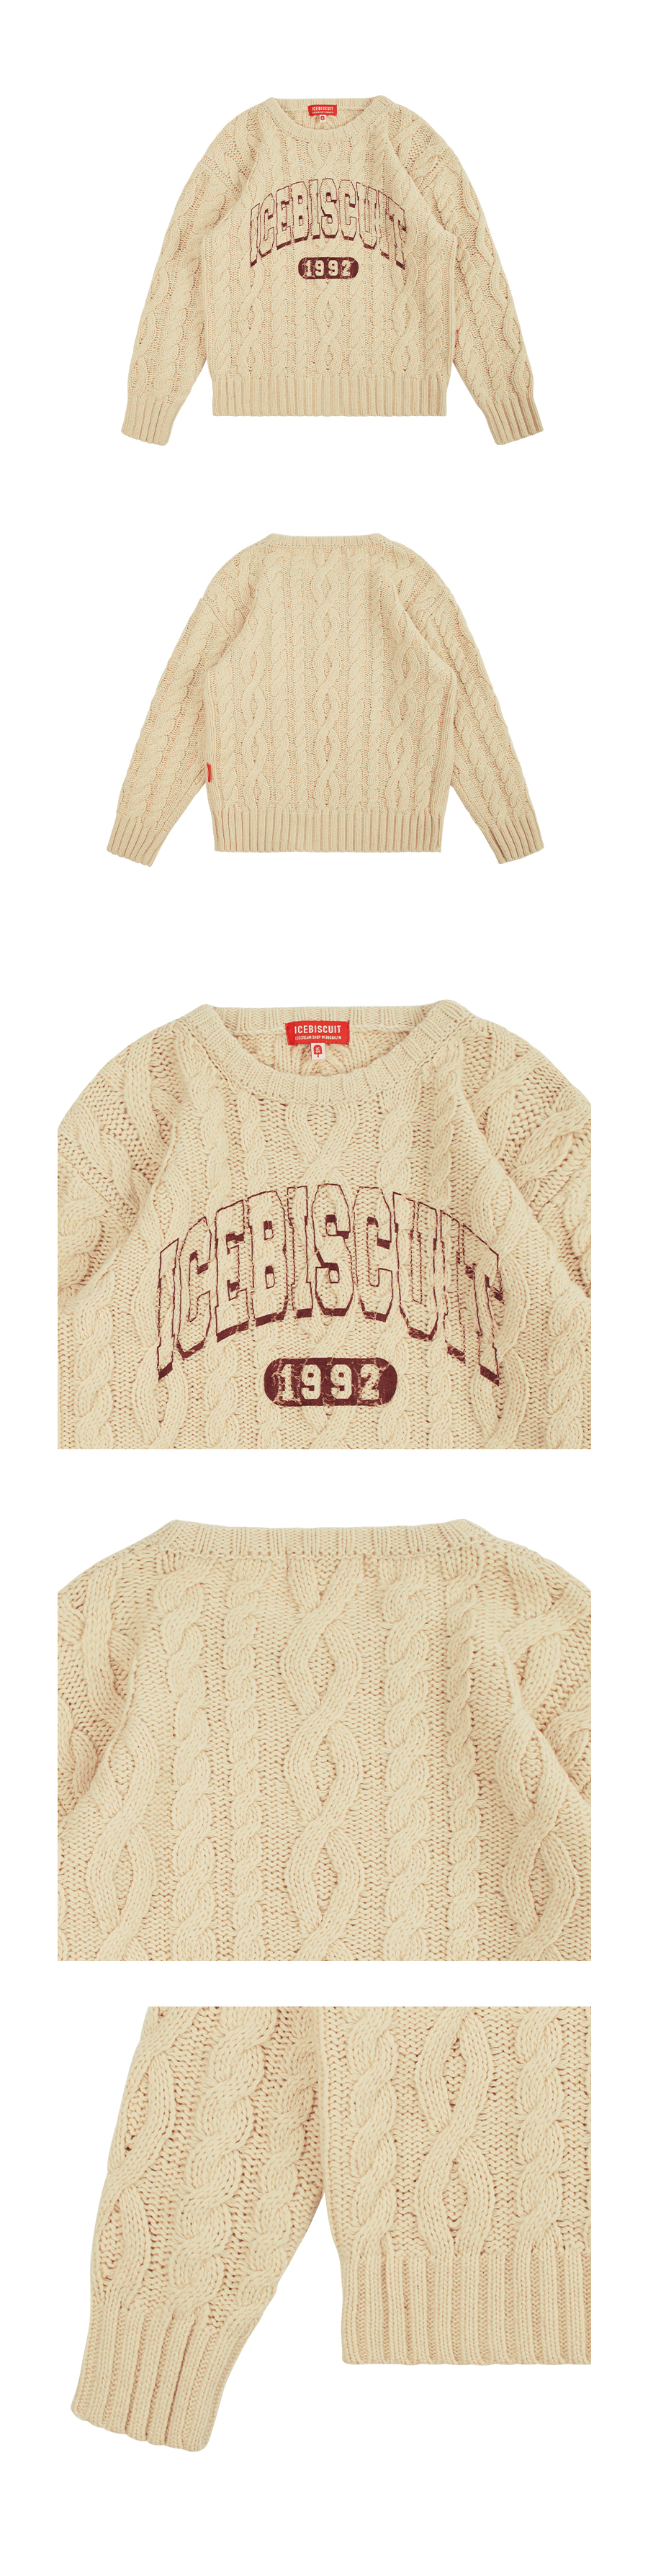 Icebiscuit logo cable sweater 상세 이미지